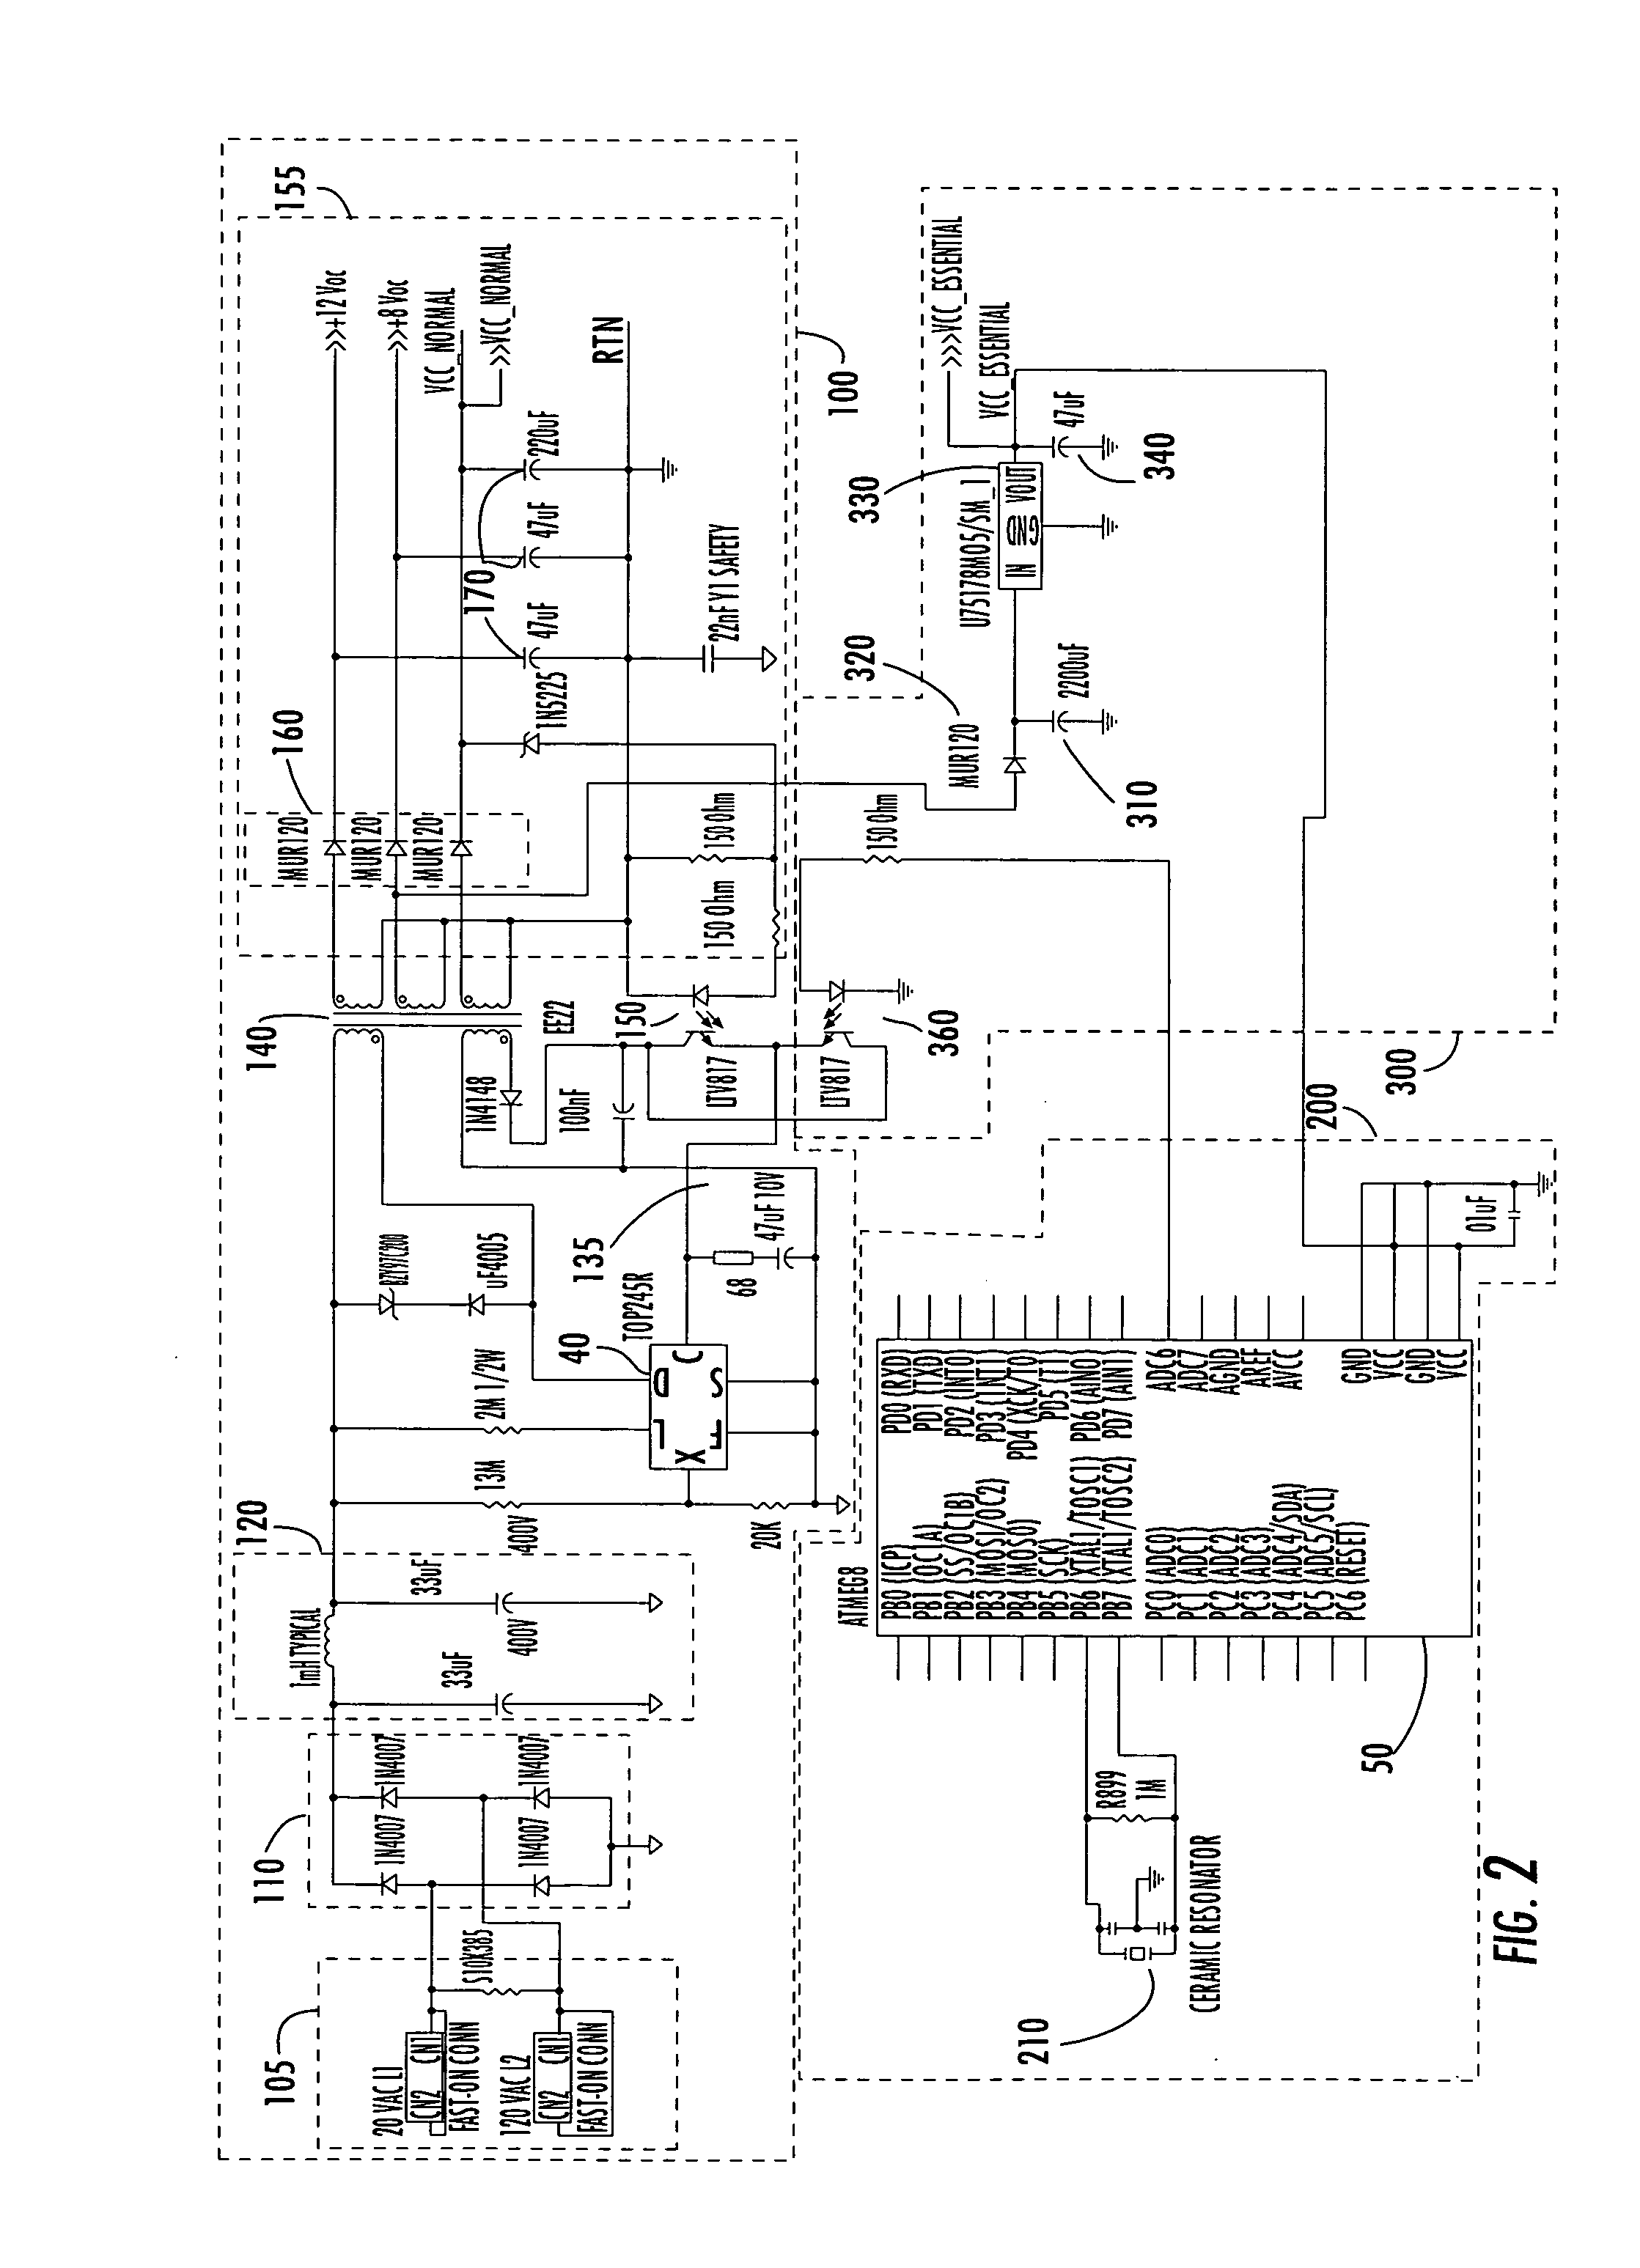 Systems and methods for achieving low power standby through interaction between a microcontroller and a switching mode power supply